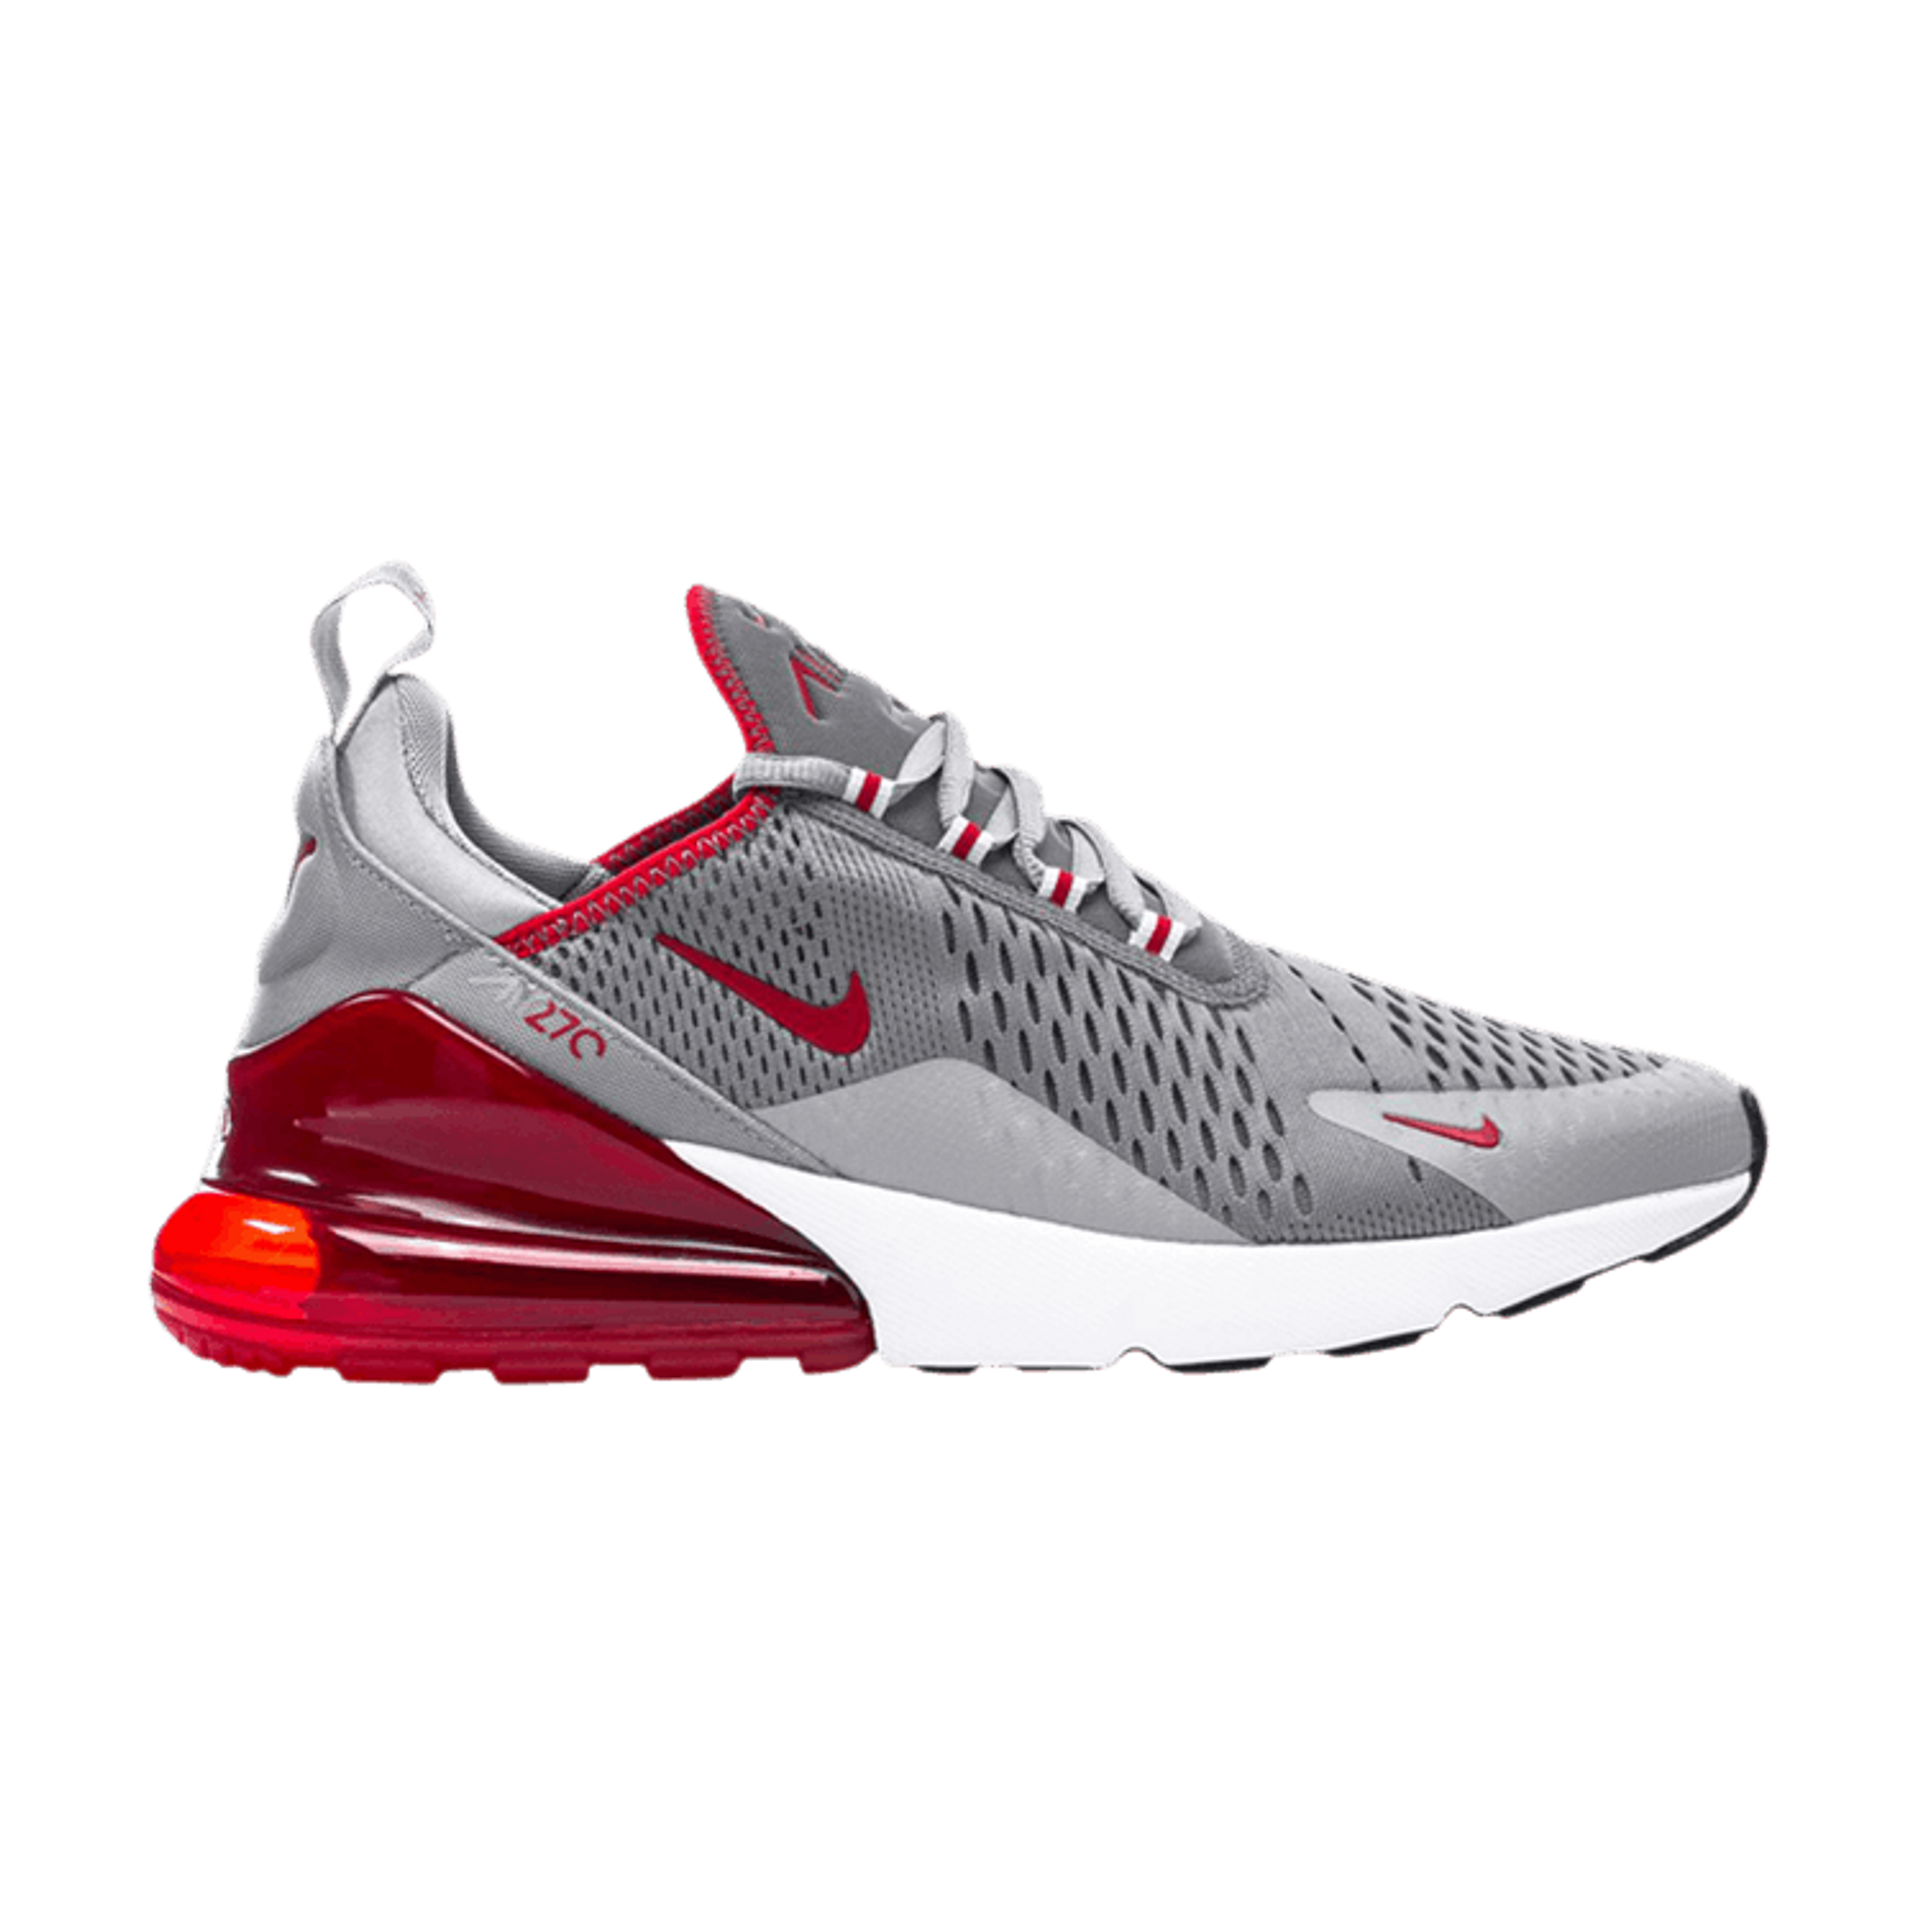 Nike Air Max 270 'Particle Grey University Red'